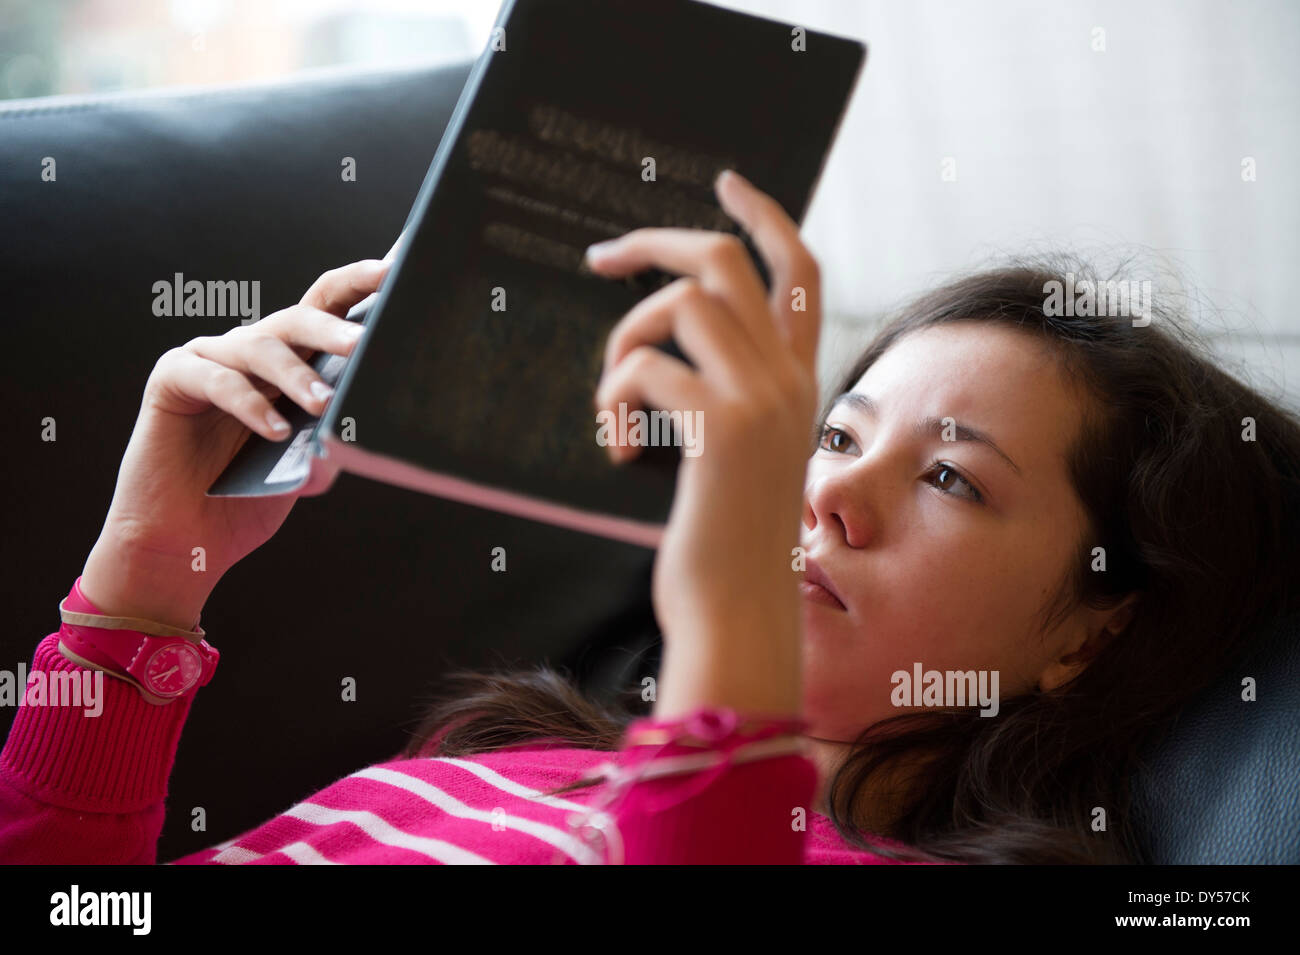 Girl lying on sofa, reading book Banque D'Images